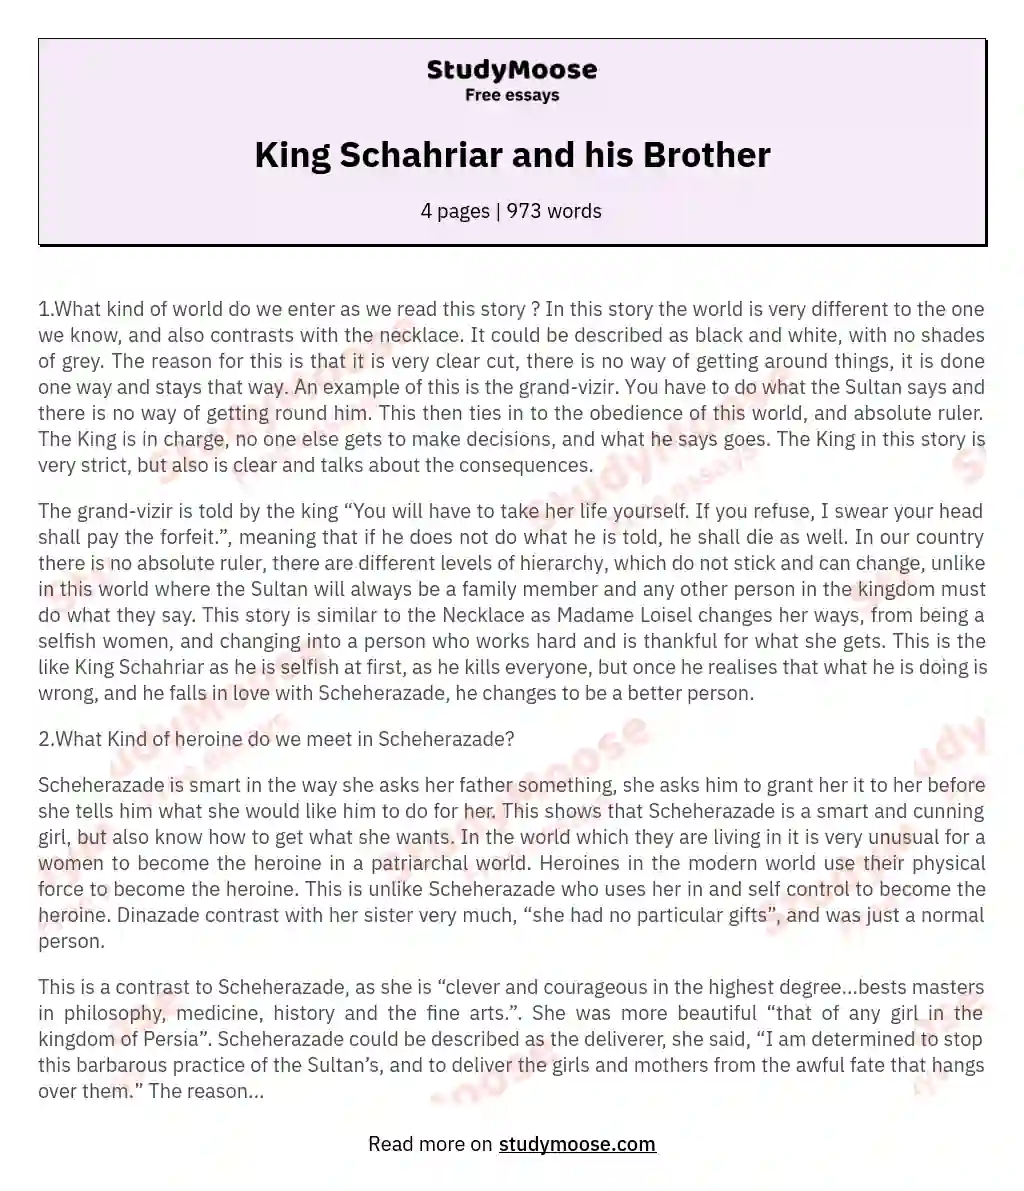 King Schahriar and his Brother essay